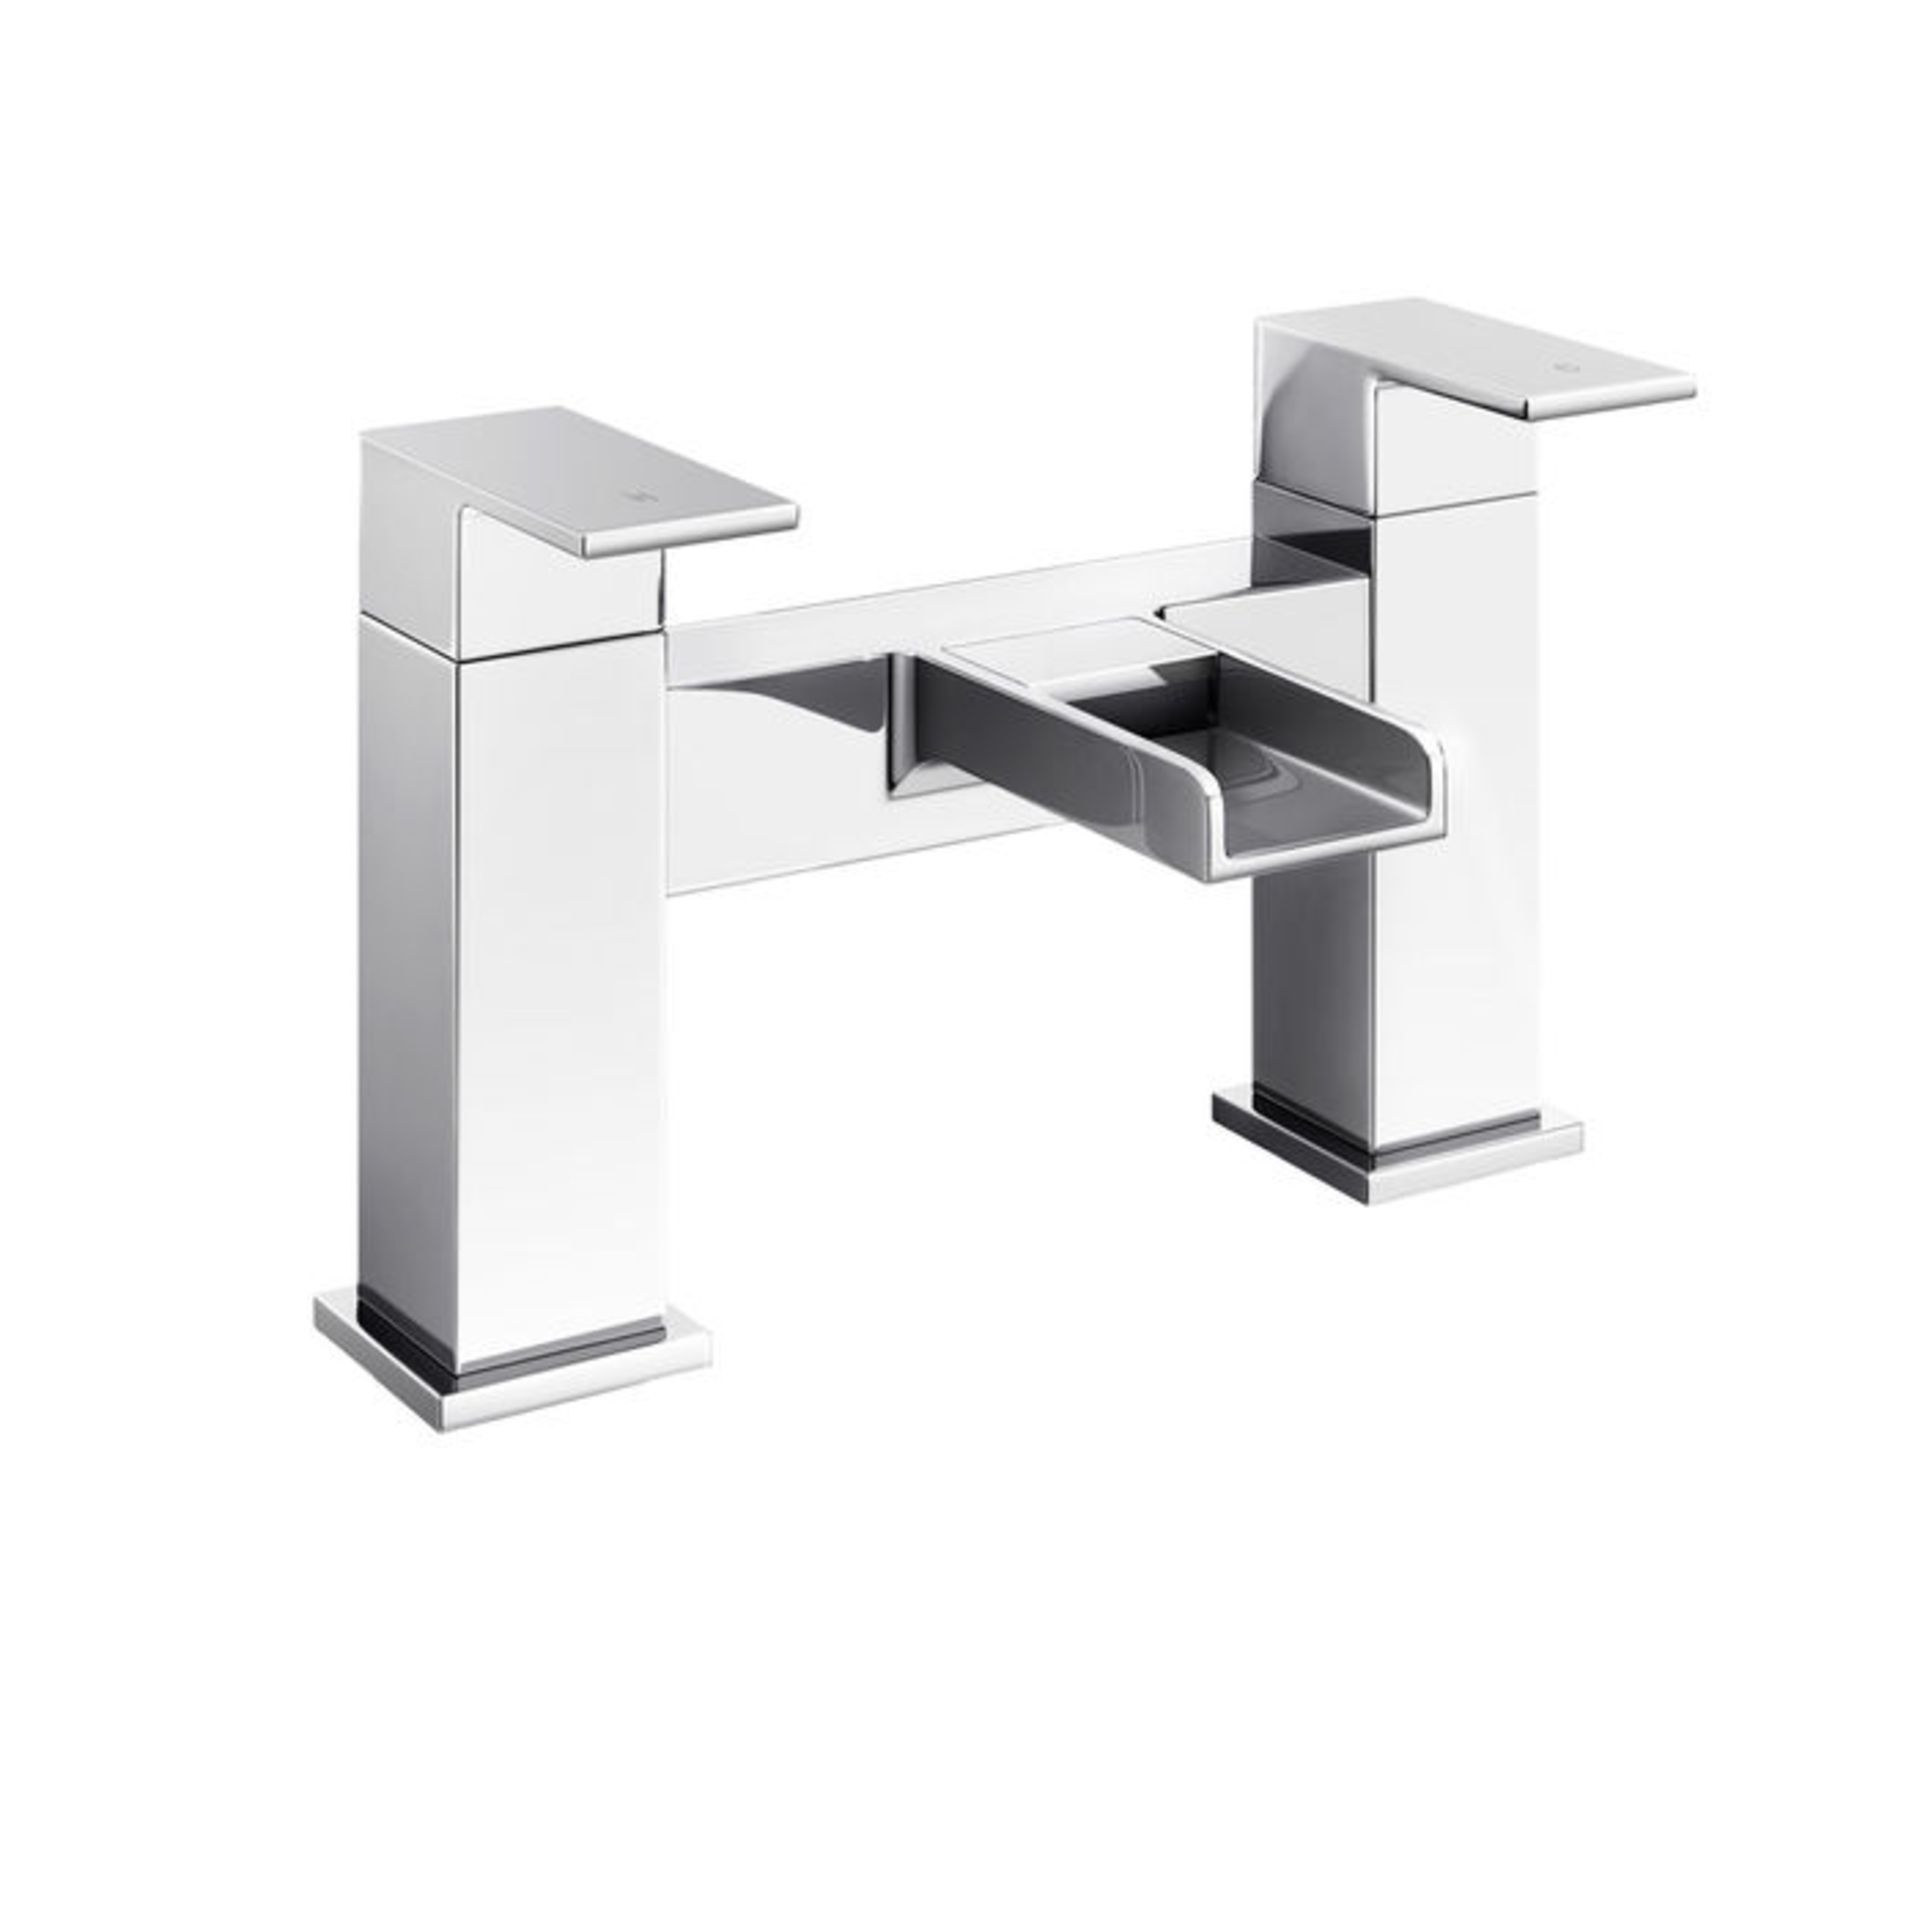 New & Boxed Niagra Waterfall Bath Mixer Taps. Tb3108. Chrome Plated Solid Brass 1/4 Turn Solid...